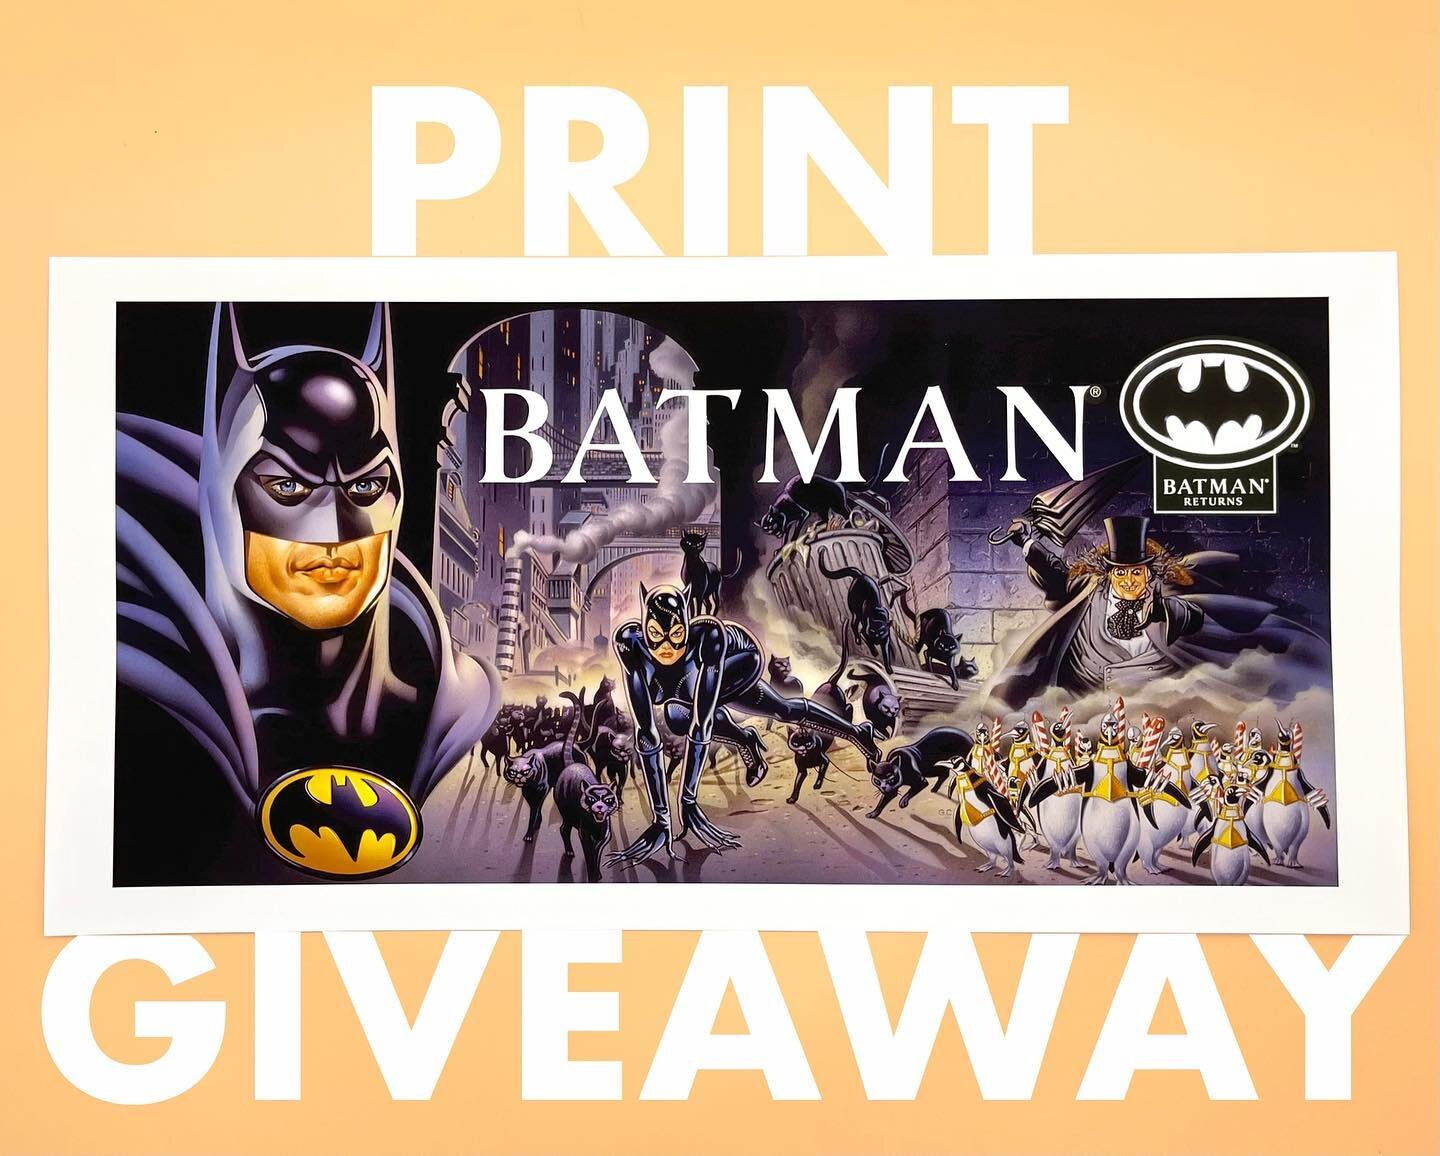 **GIVEAWAY ALERT** @burtonsgotham and @yourillustratedchildhood are partnering to celebrate the 30th anniversary of Batman Returns by giving away a personalized signed art print of the original art from the official Batman Returns board game illustra